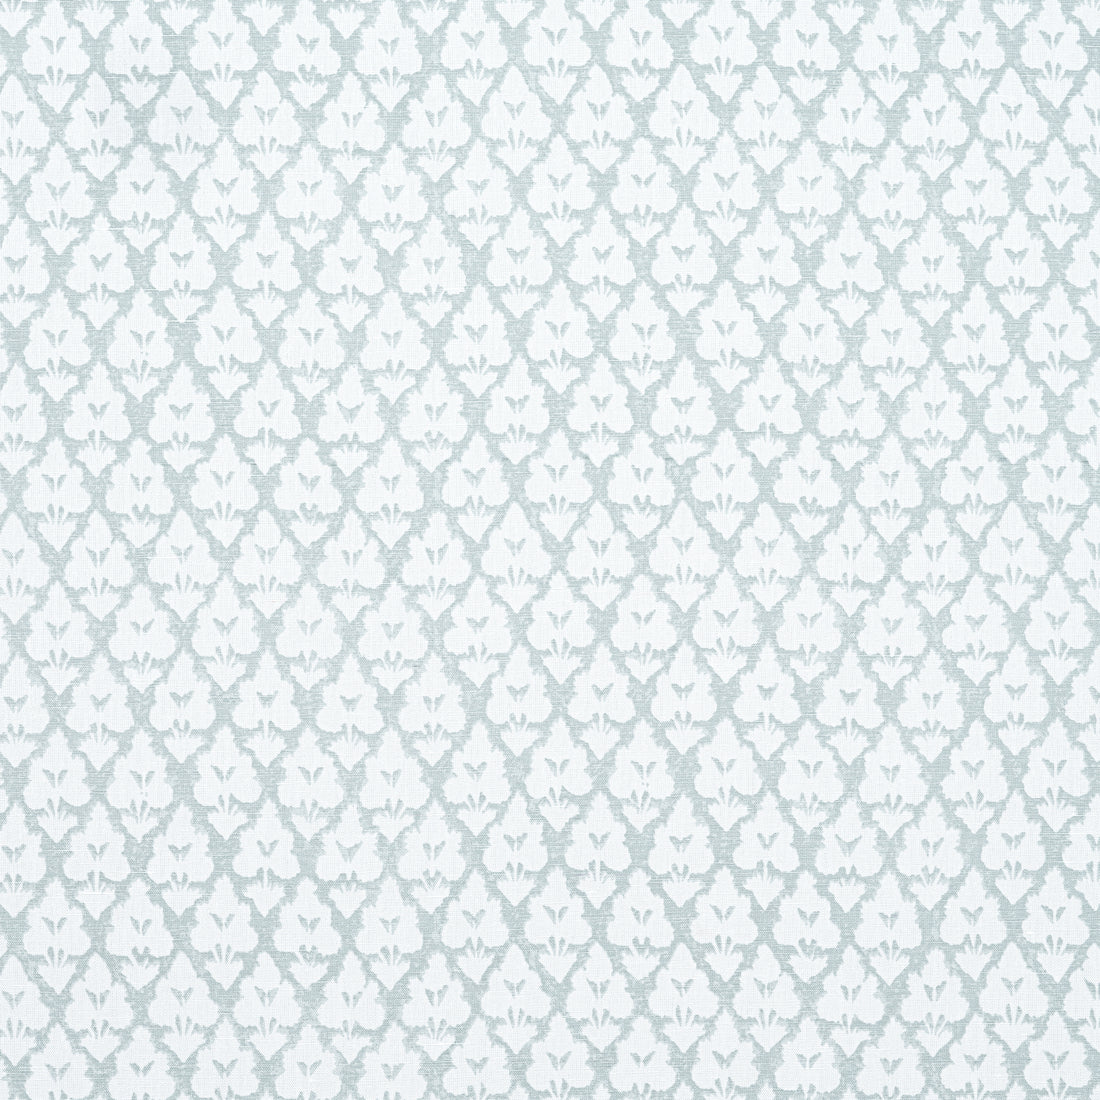 Arboreta fabric in spa blue color - pattern number F910832 - by Thibaut in the Heritage collection